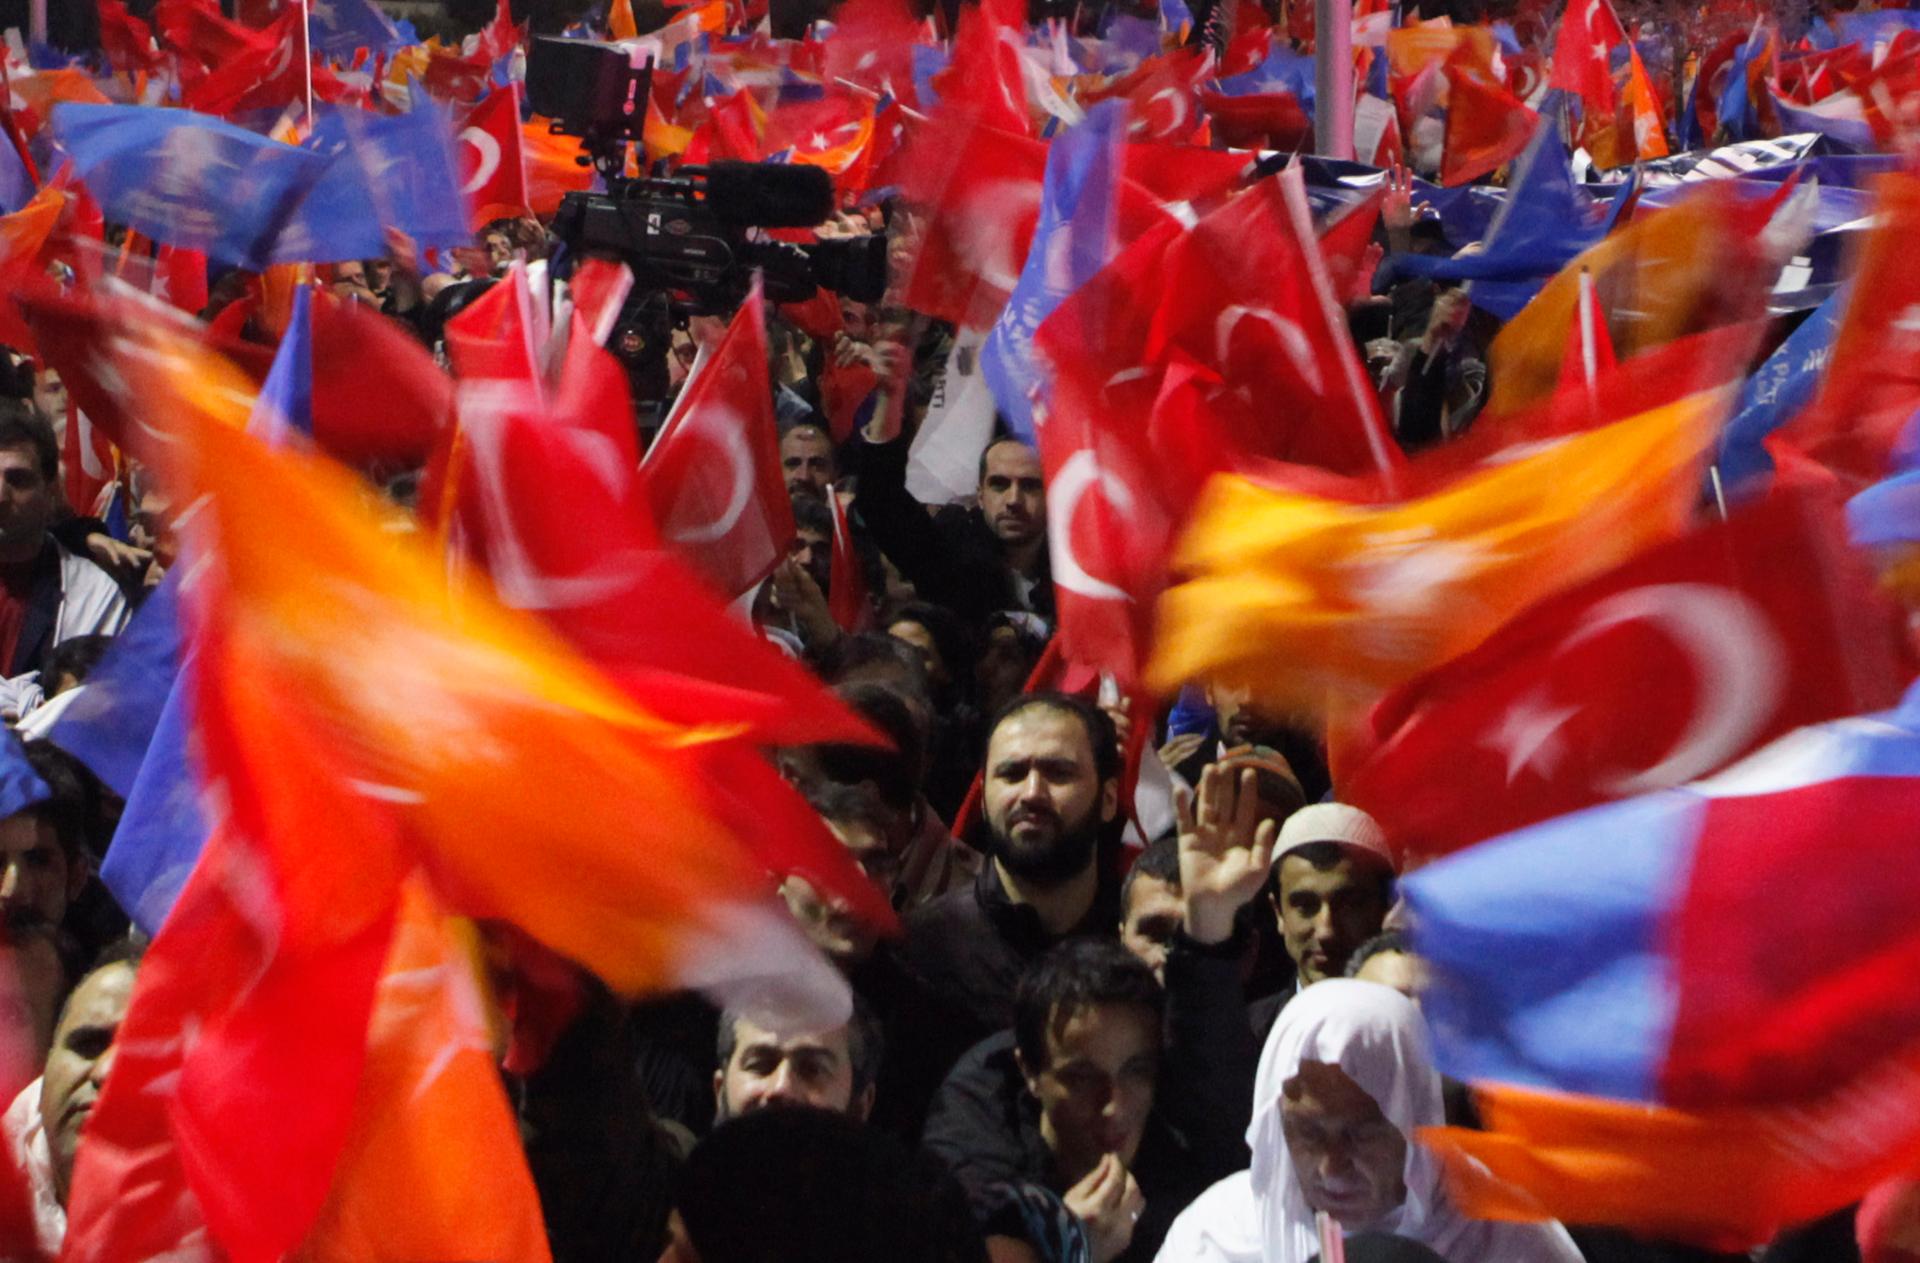 Supporters of Turkey's Prime Minister Tayyip Erdogan